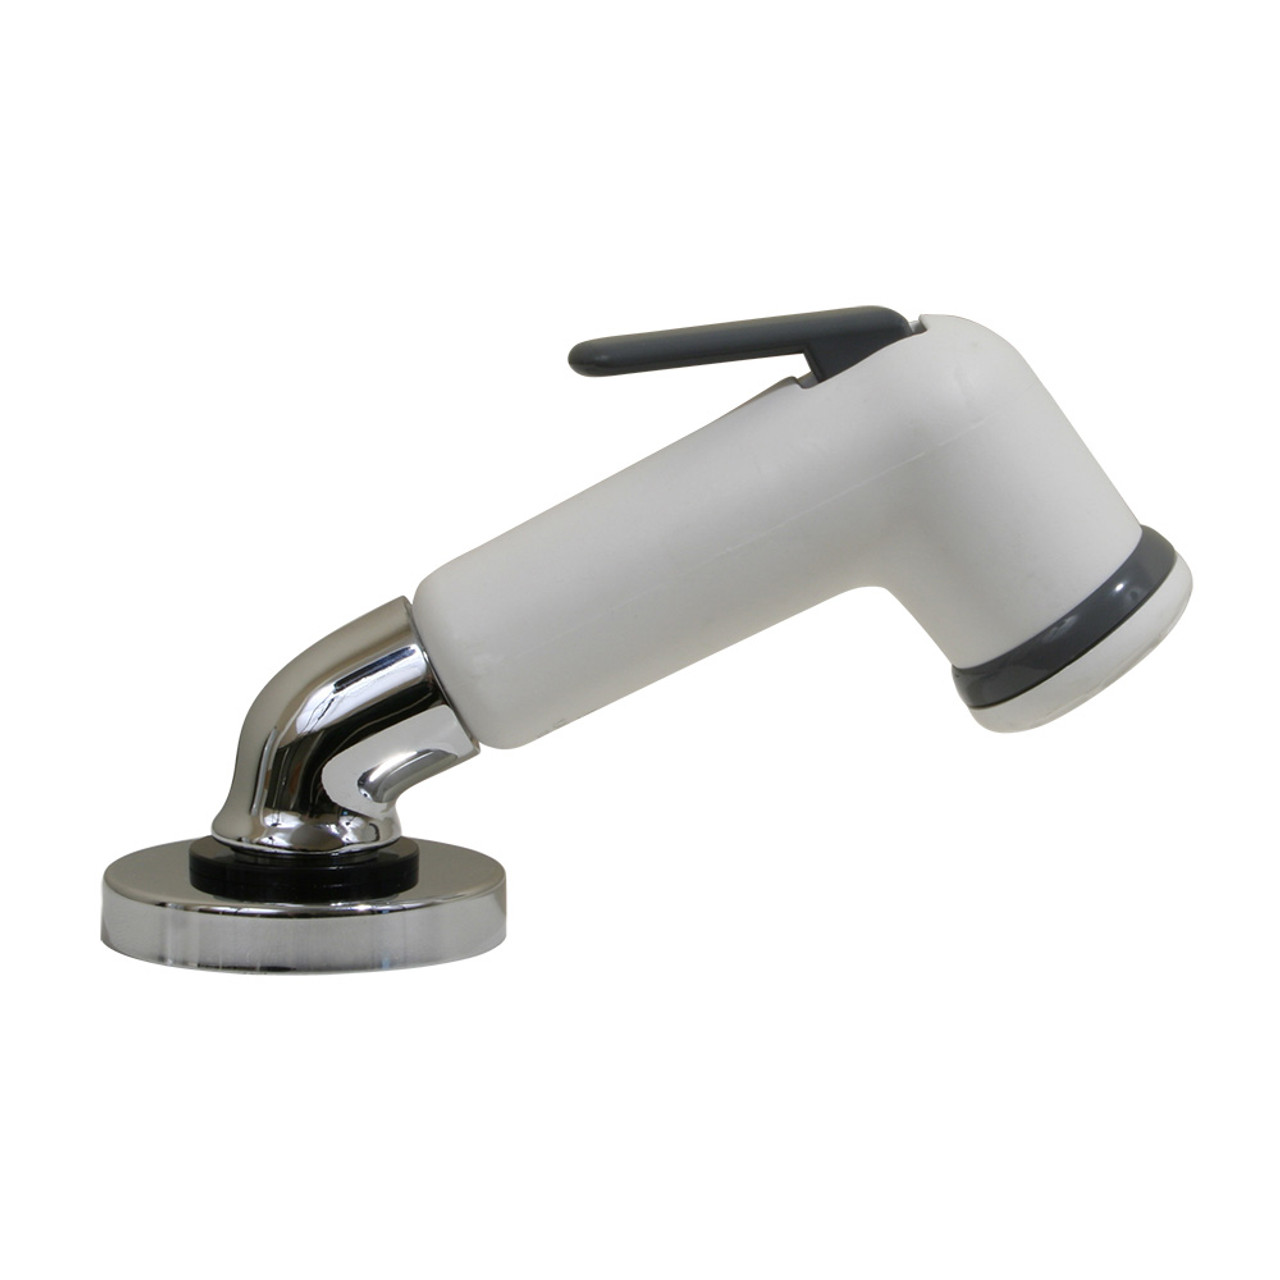 Scandvik - Elbow Sprayer - Handle Pull Out, White, With 6' Hose - Apollo Lighting